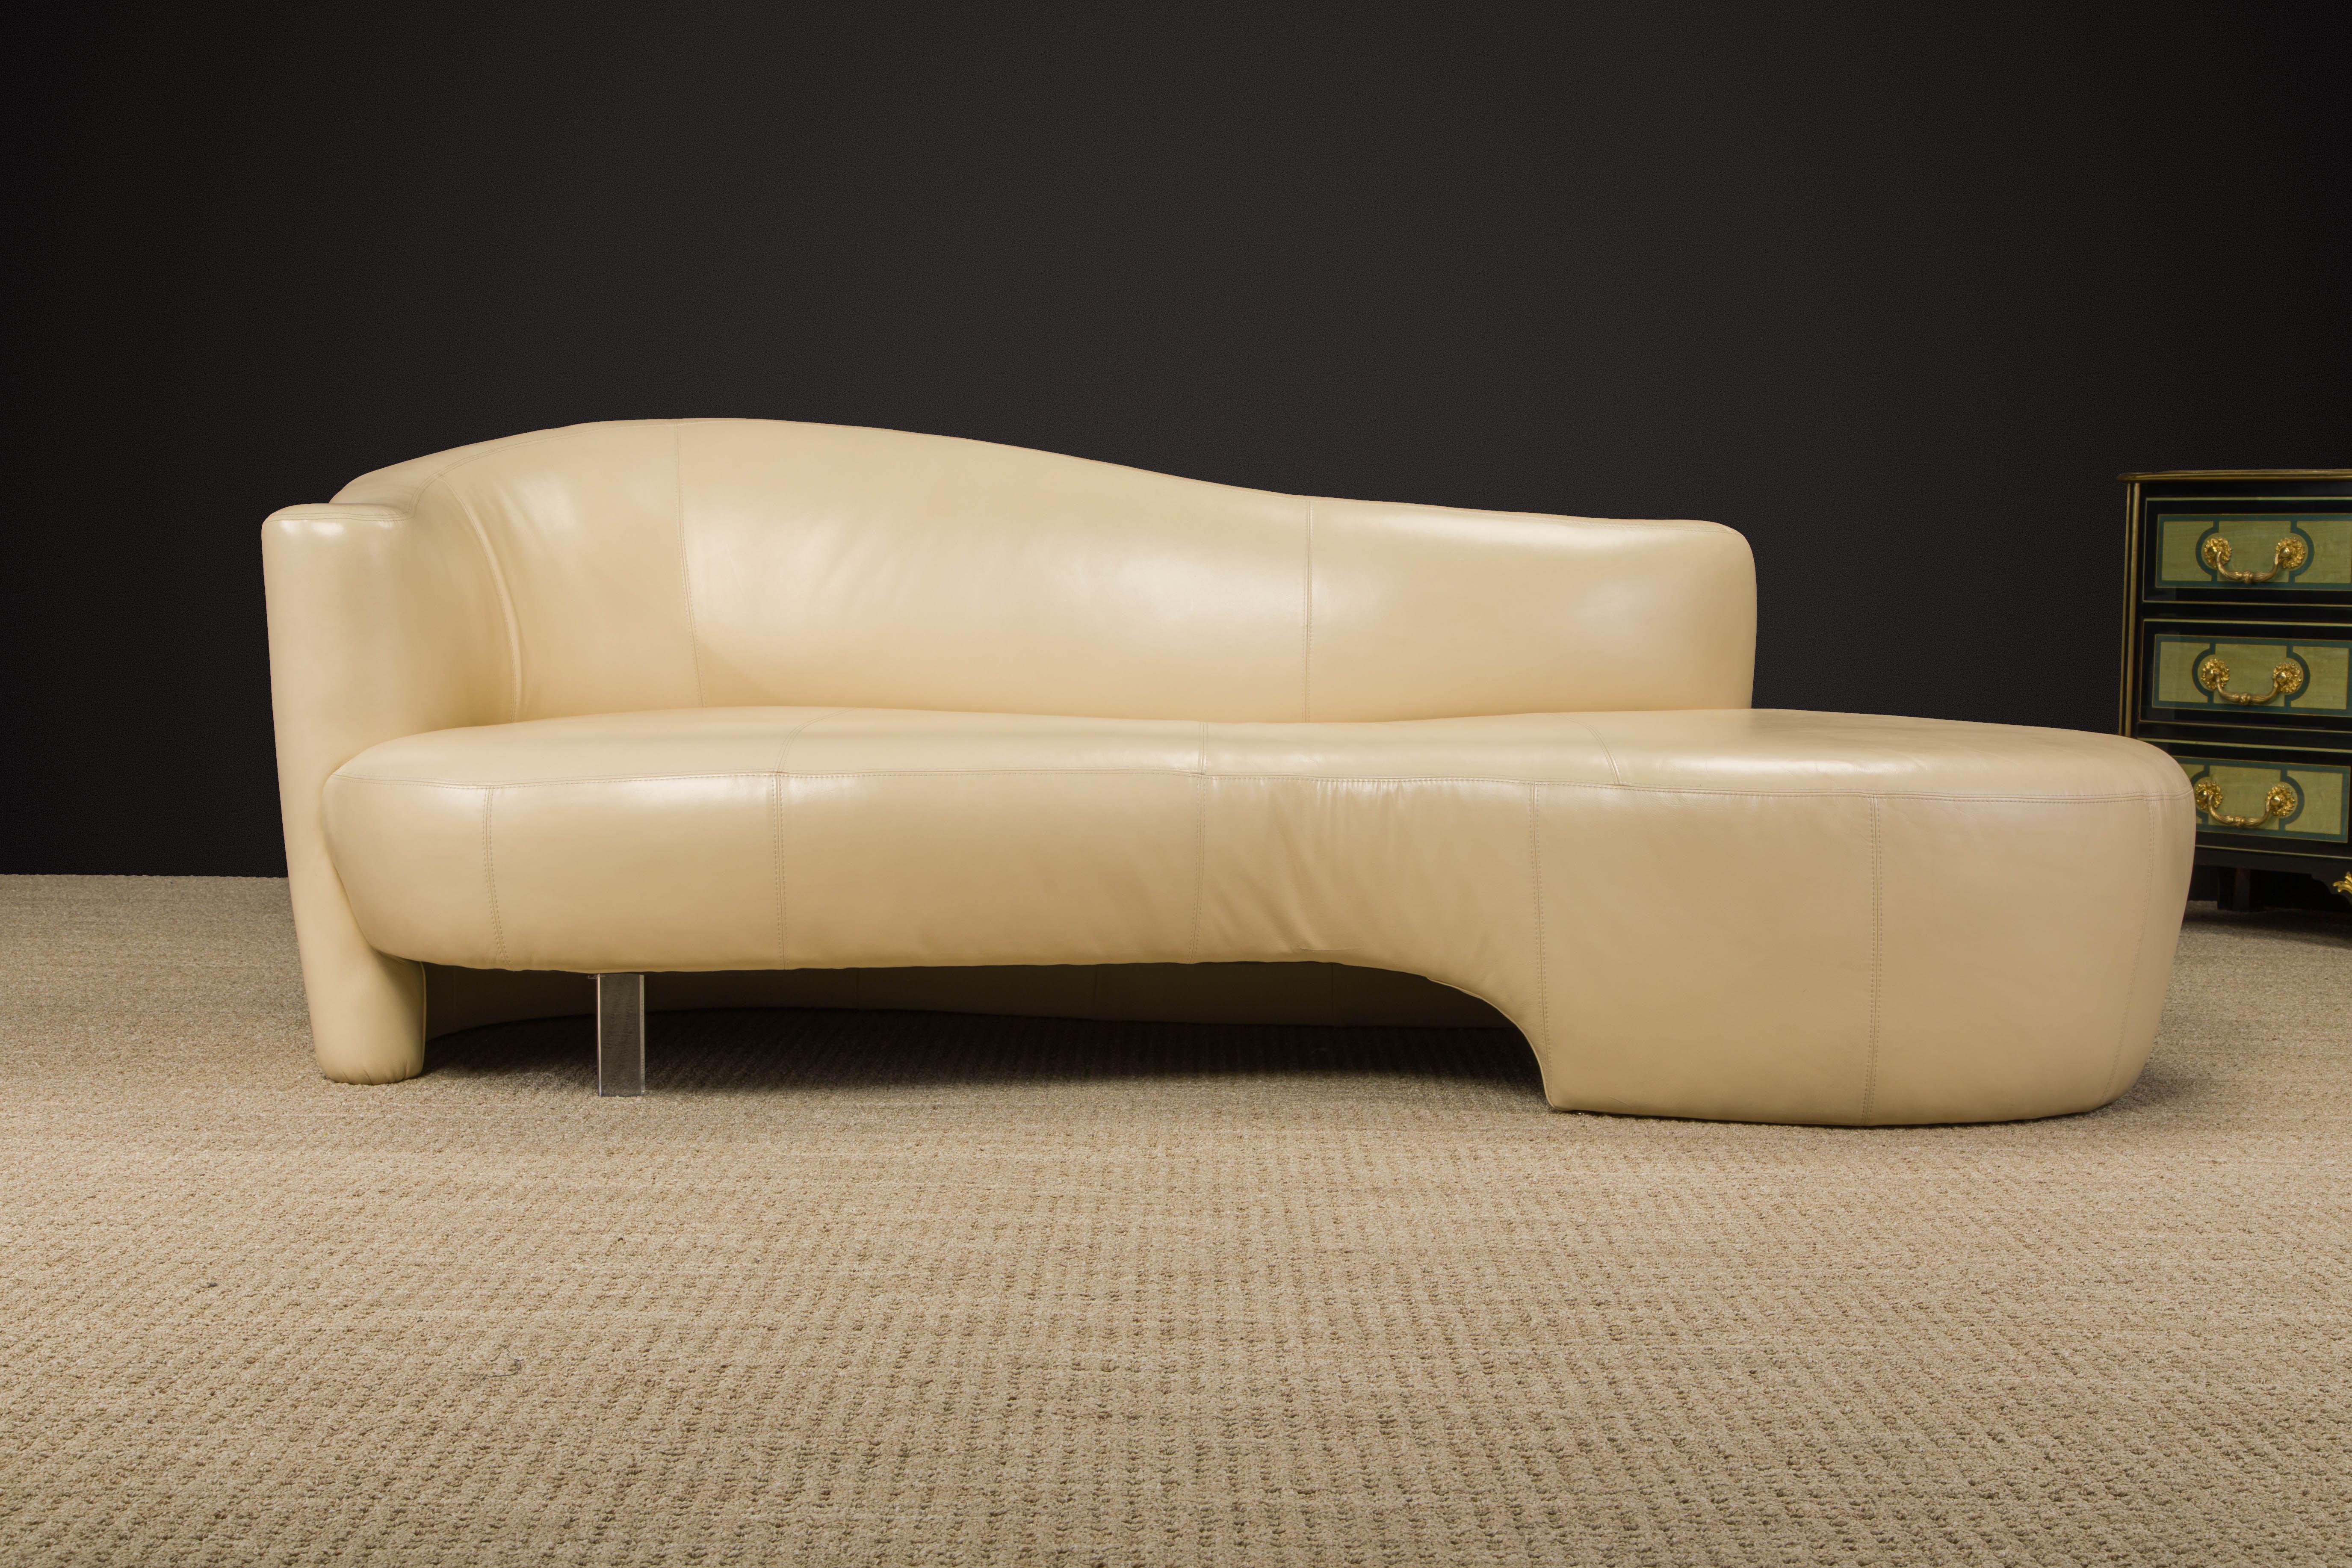 This beautiful curvy and fluid Post-Modern sofa by Weiman is in soft and luxurious tan colored leather, features a single lucite leg and is signed underneath with a Weiman label.  

Designed by Robert L. Ebel and produced by Wieman in the 1980s and